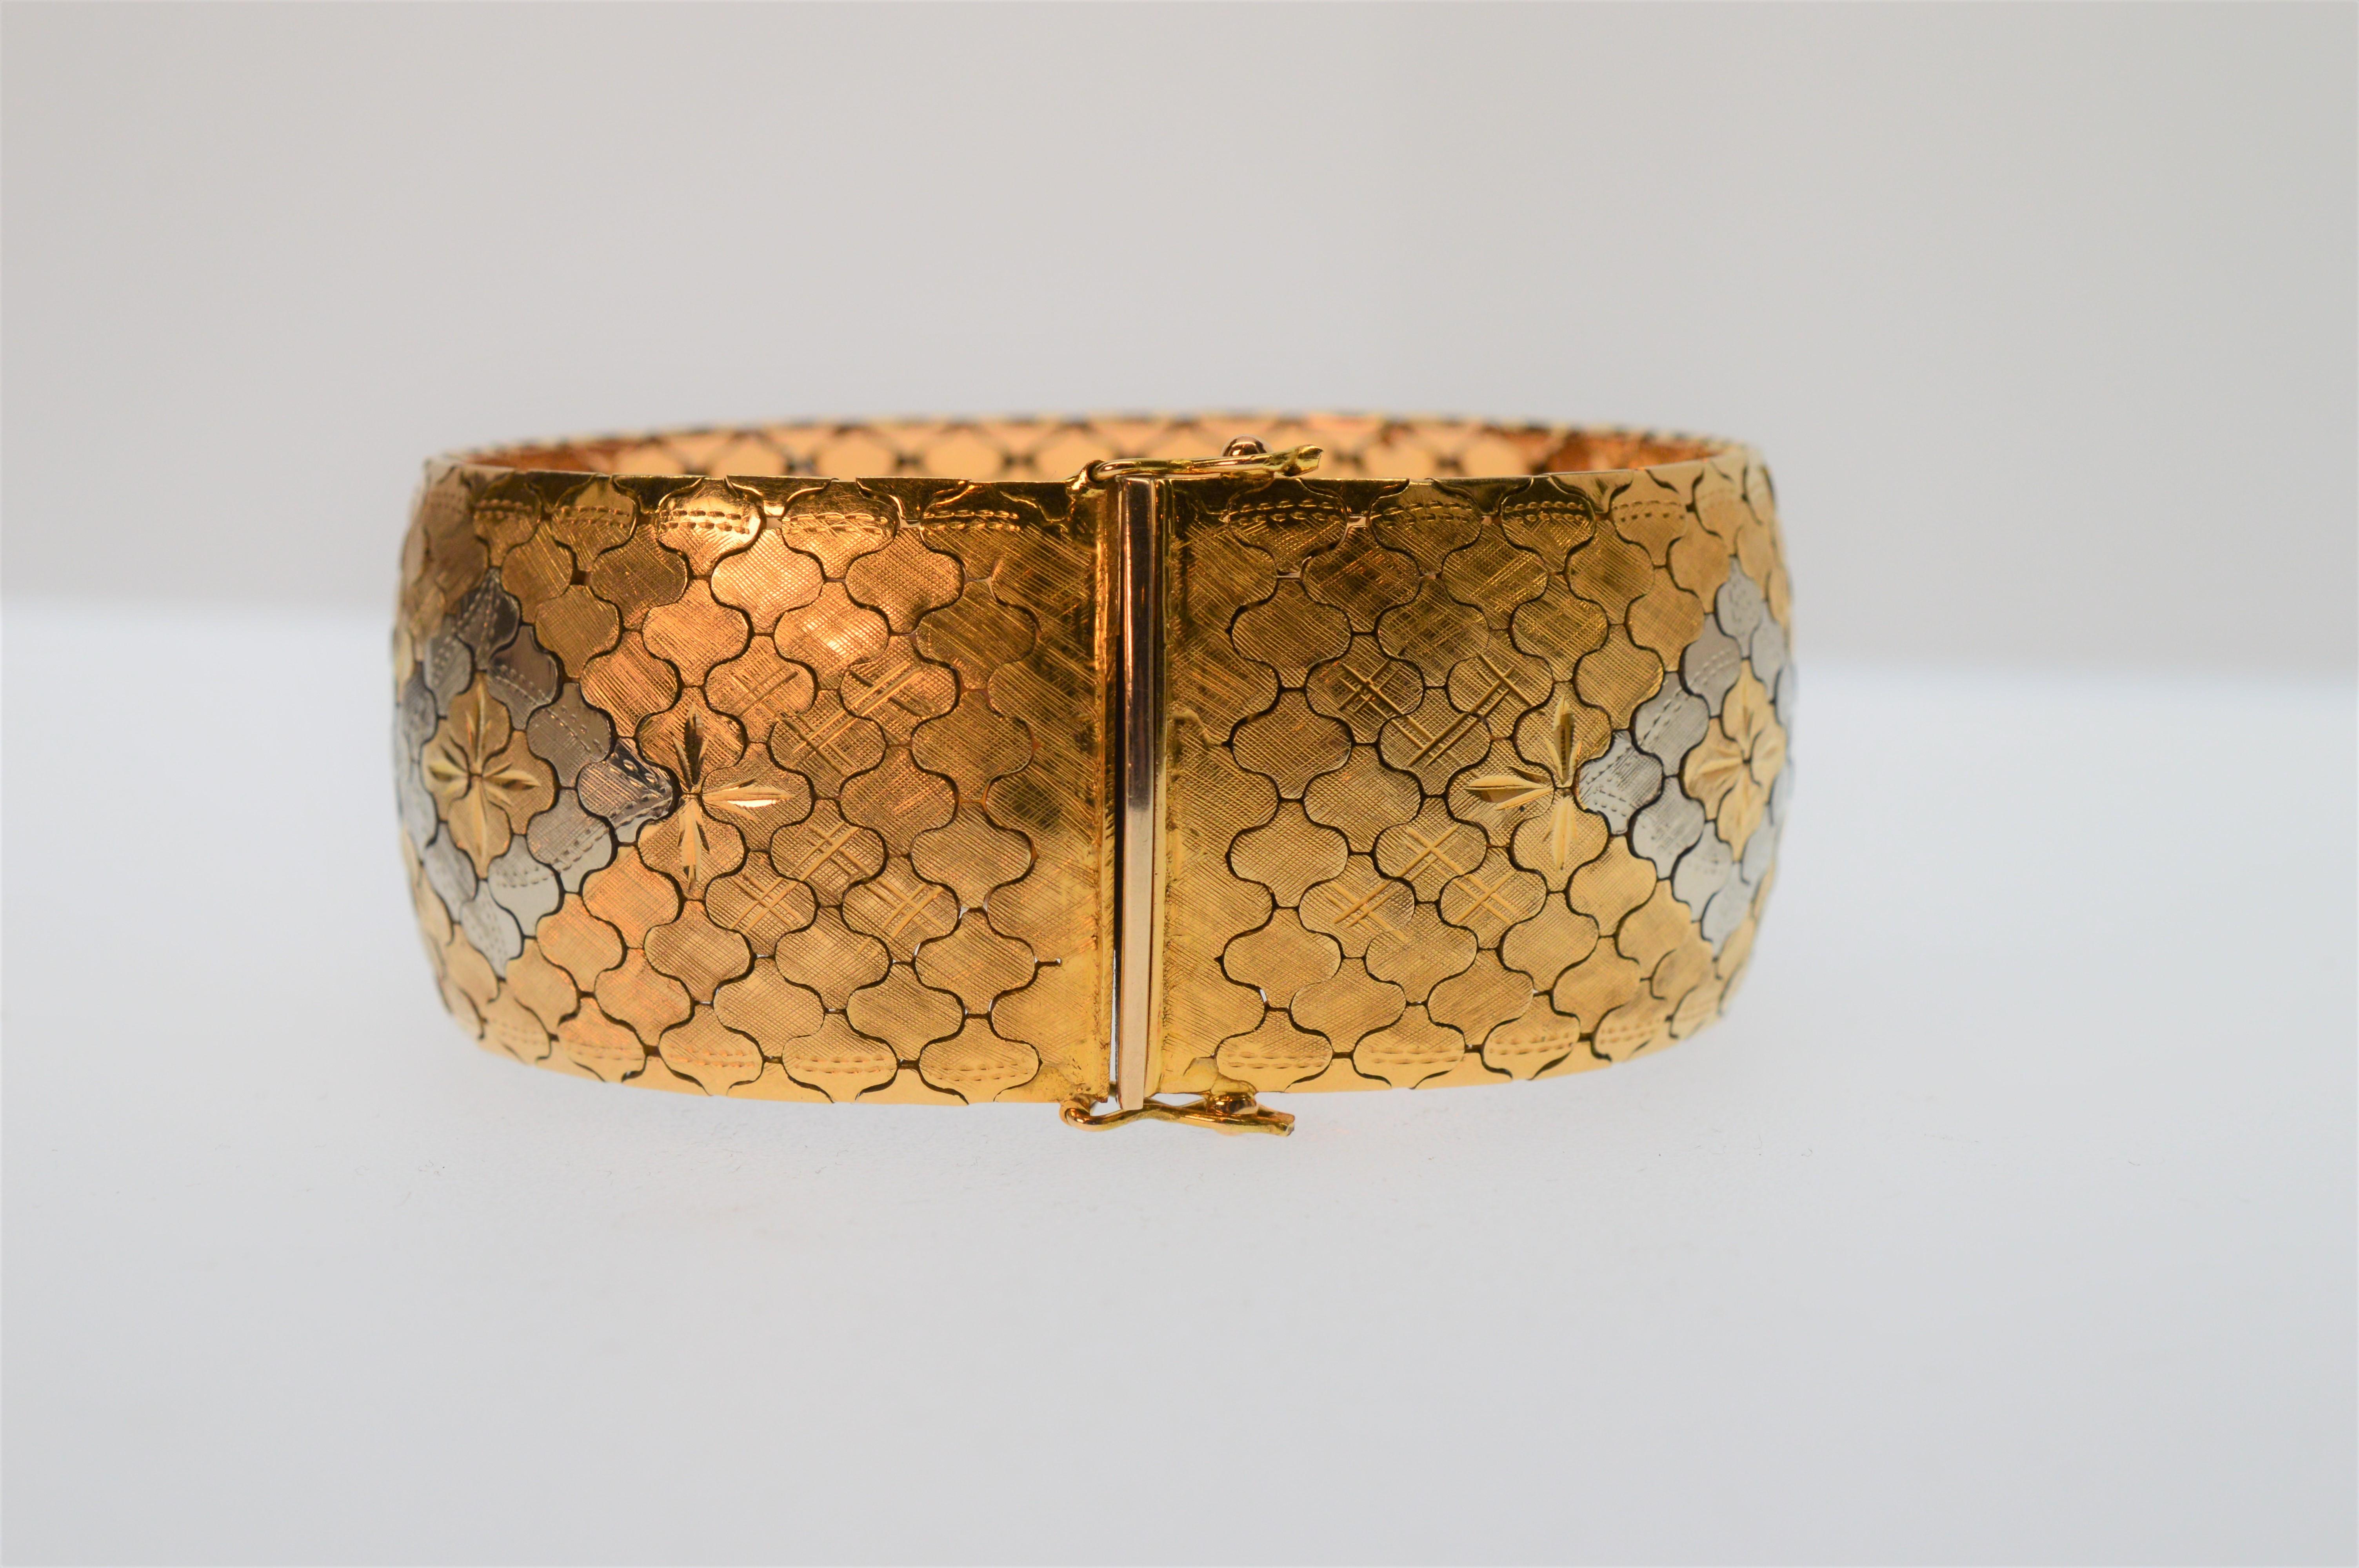 Intriguing and bold, this eighteen karat (18k) gold bracelet is expertly crafted with an intricate pattern of yellow, white and rose gold creating a multi-color unique geo floral design. Italian made, the links are fashioned in such a way that the